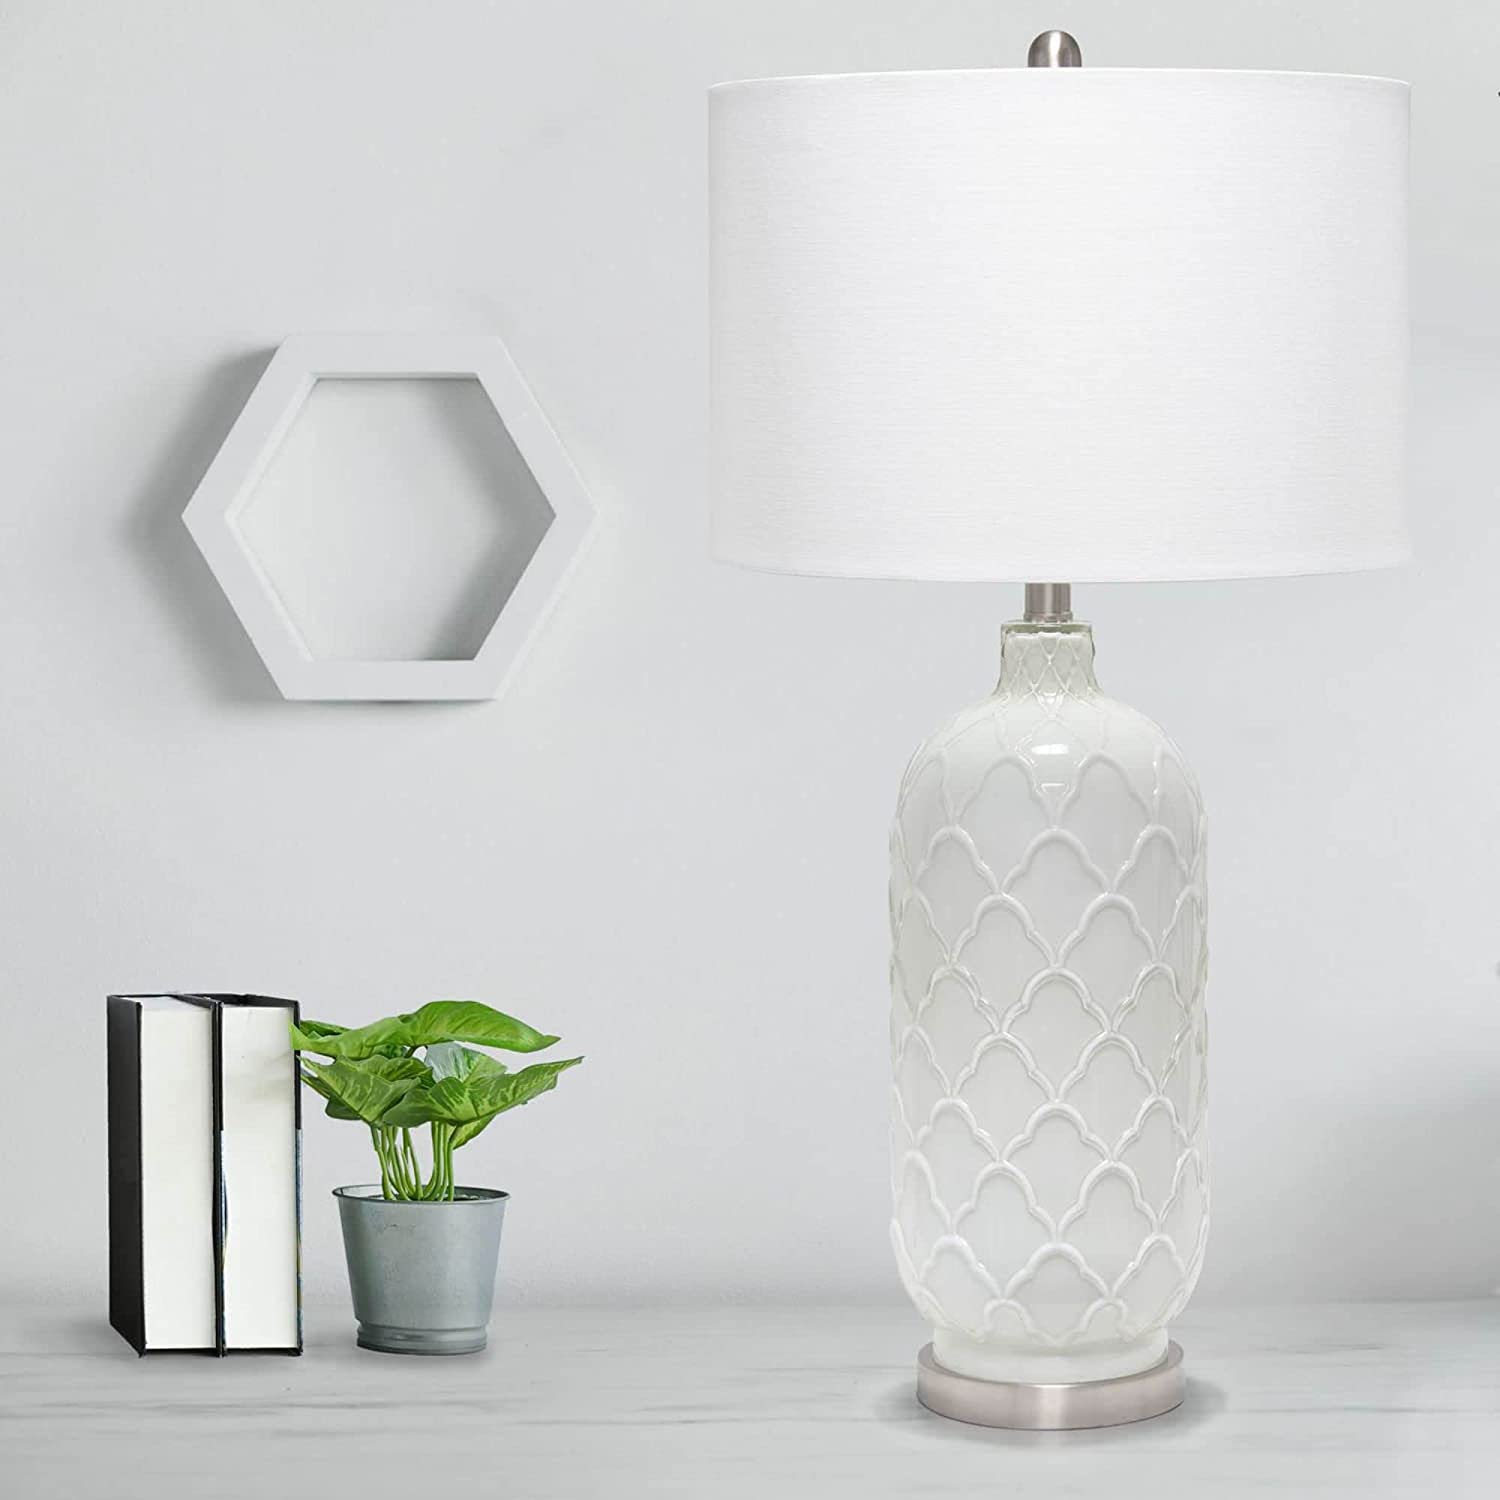 Lalia Home Contemporary Argyle Classic White Table Lamp with Fabric Shade